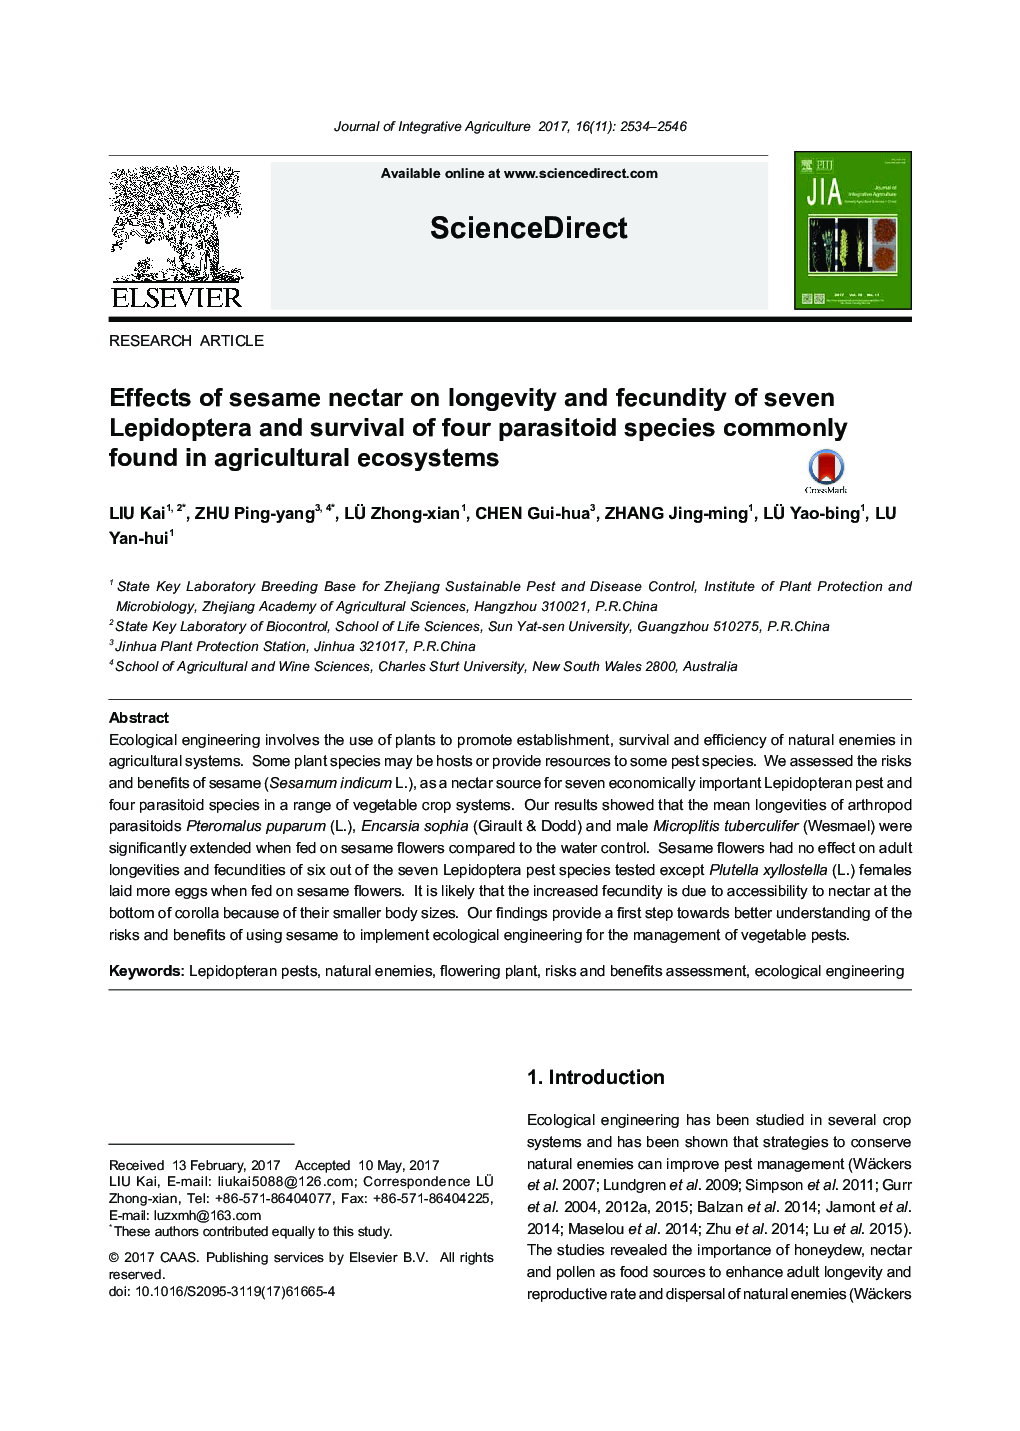 Effects of sesame nectar on longevity and fecundity of seven Lepidoptera and survival of four parasitoid species commonly found in agricultural ecosystems